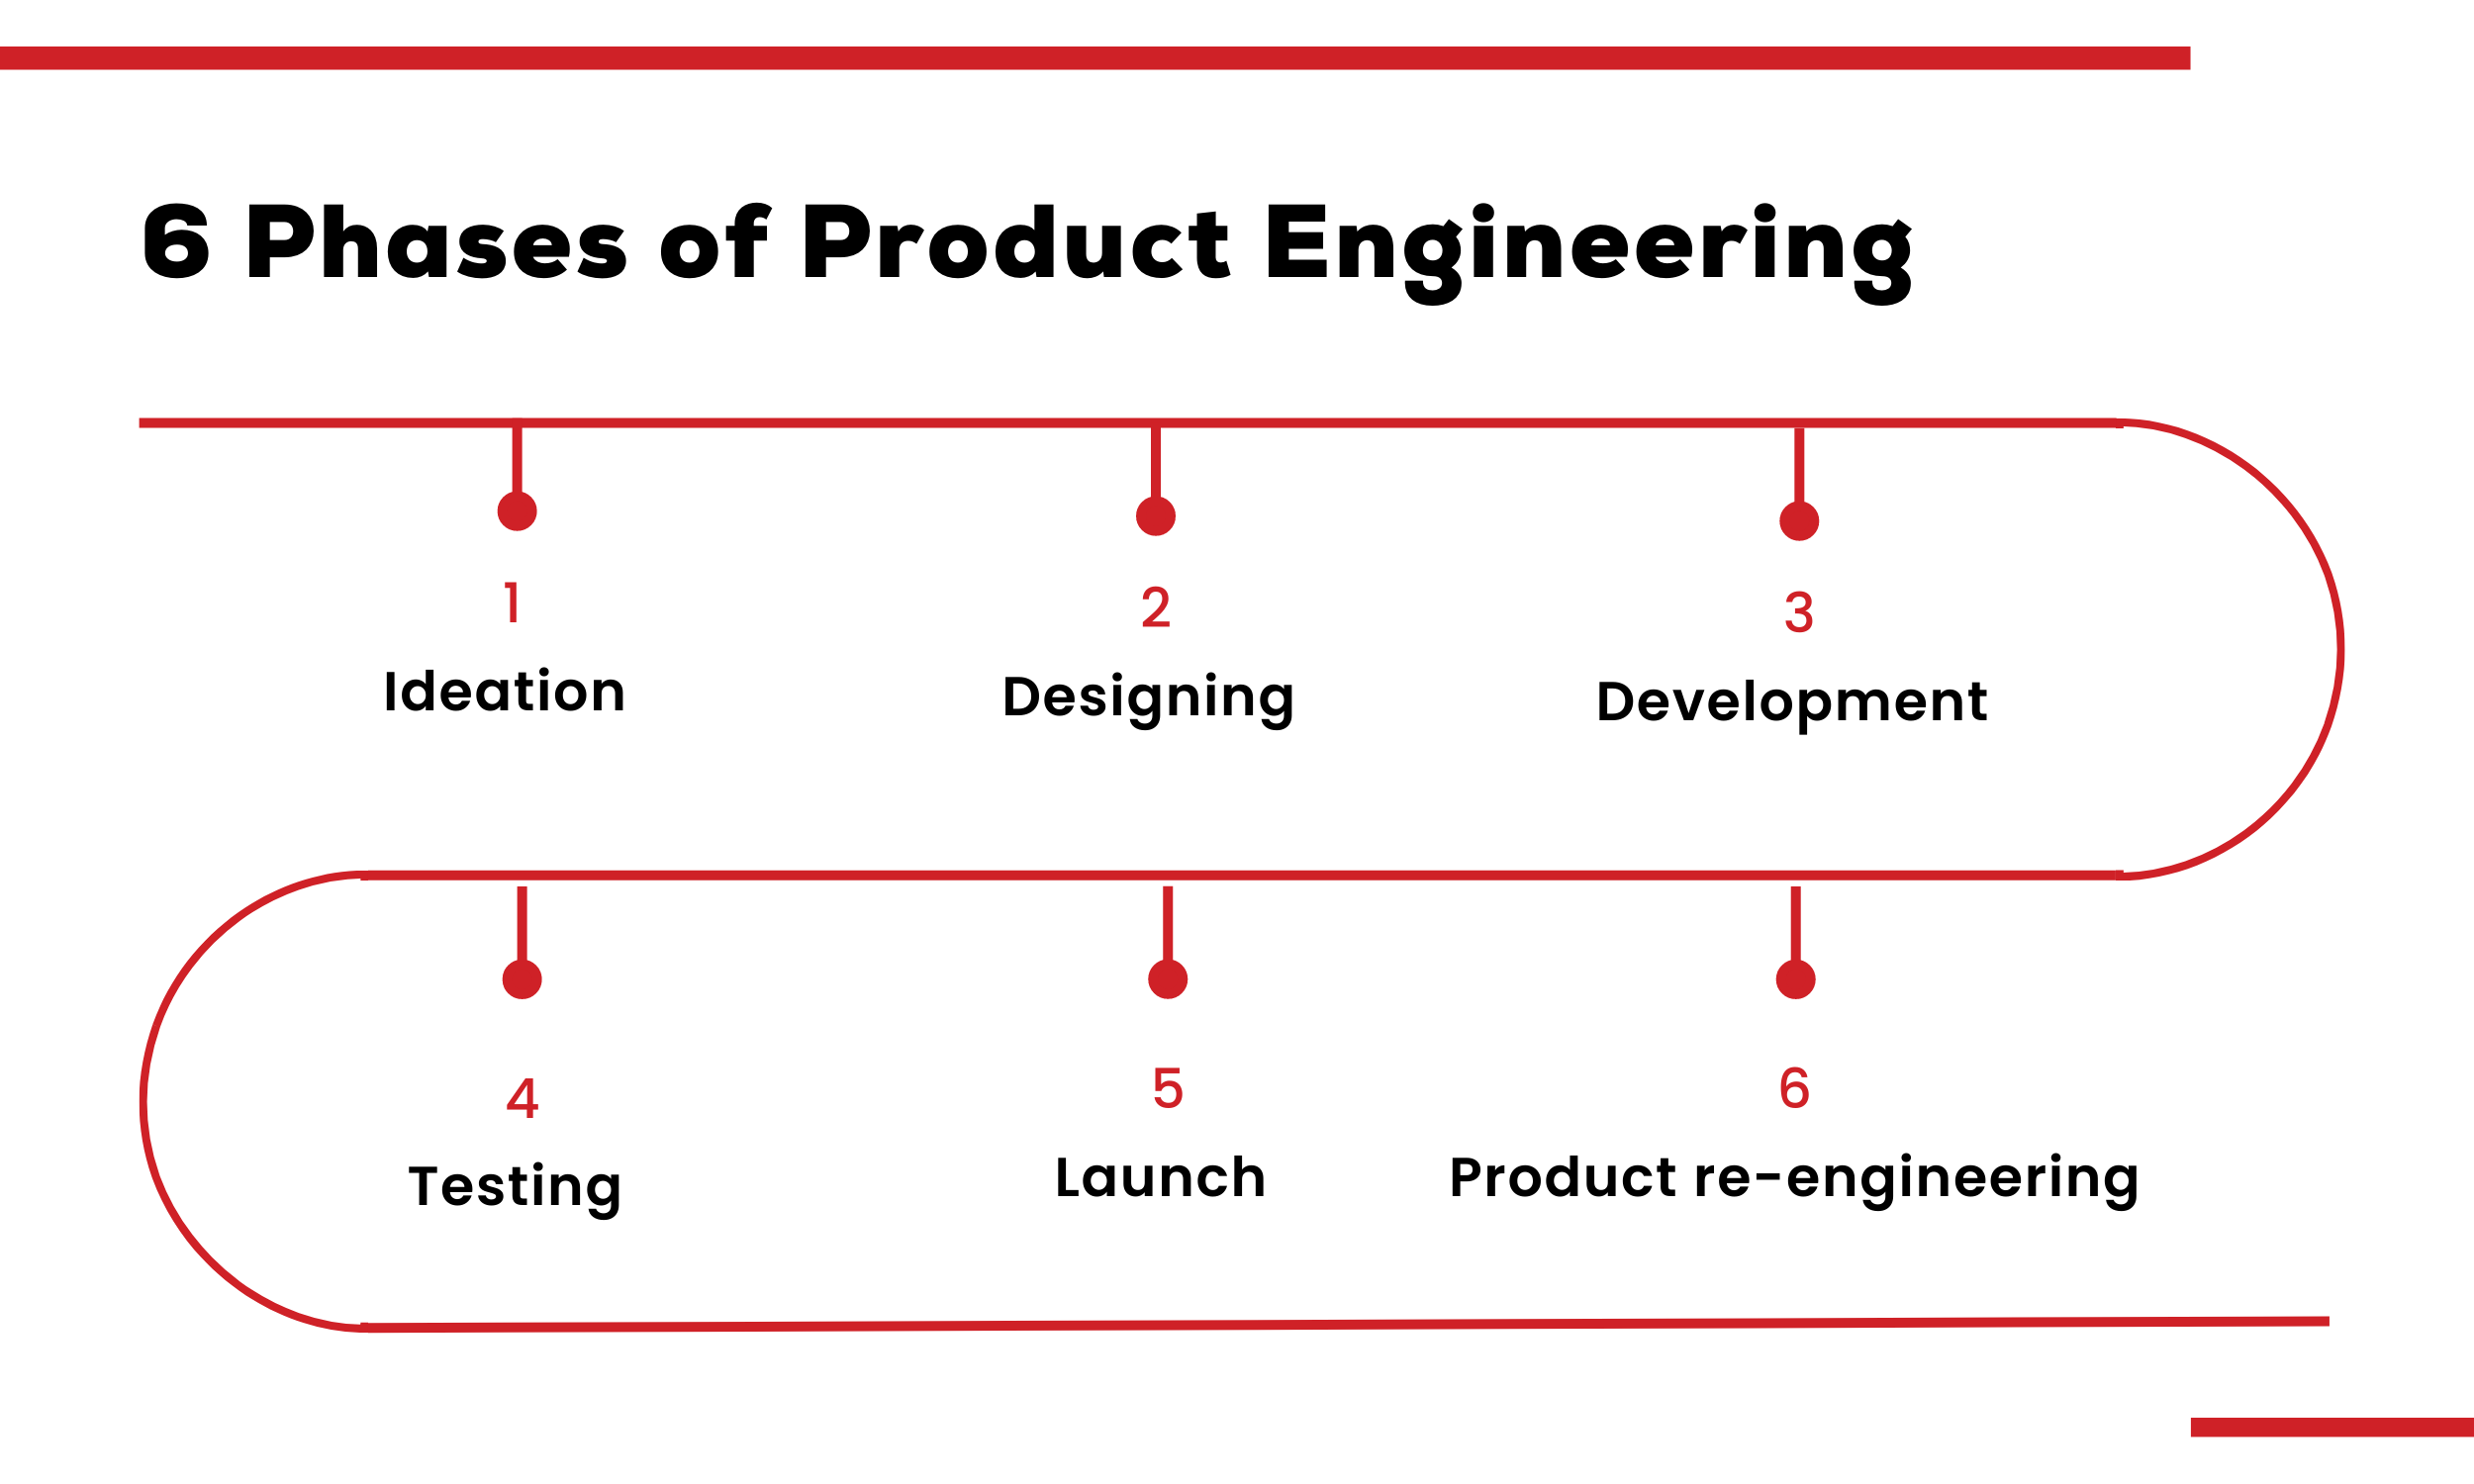 6 Phases of Product Engineering